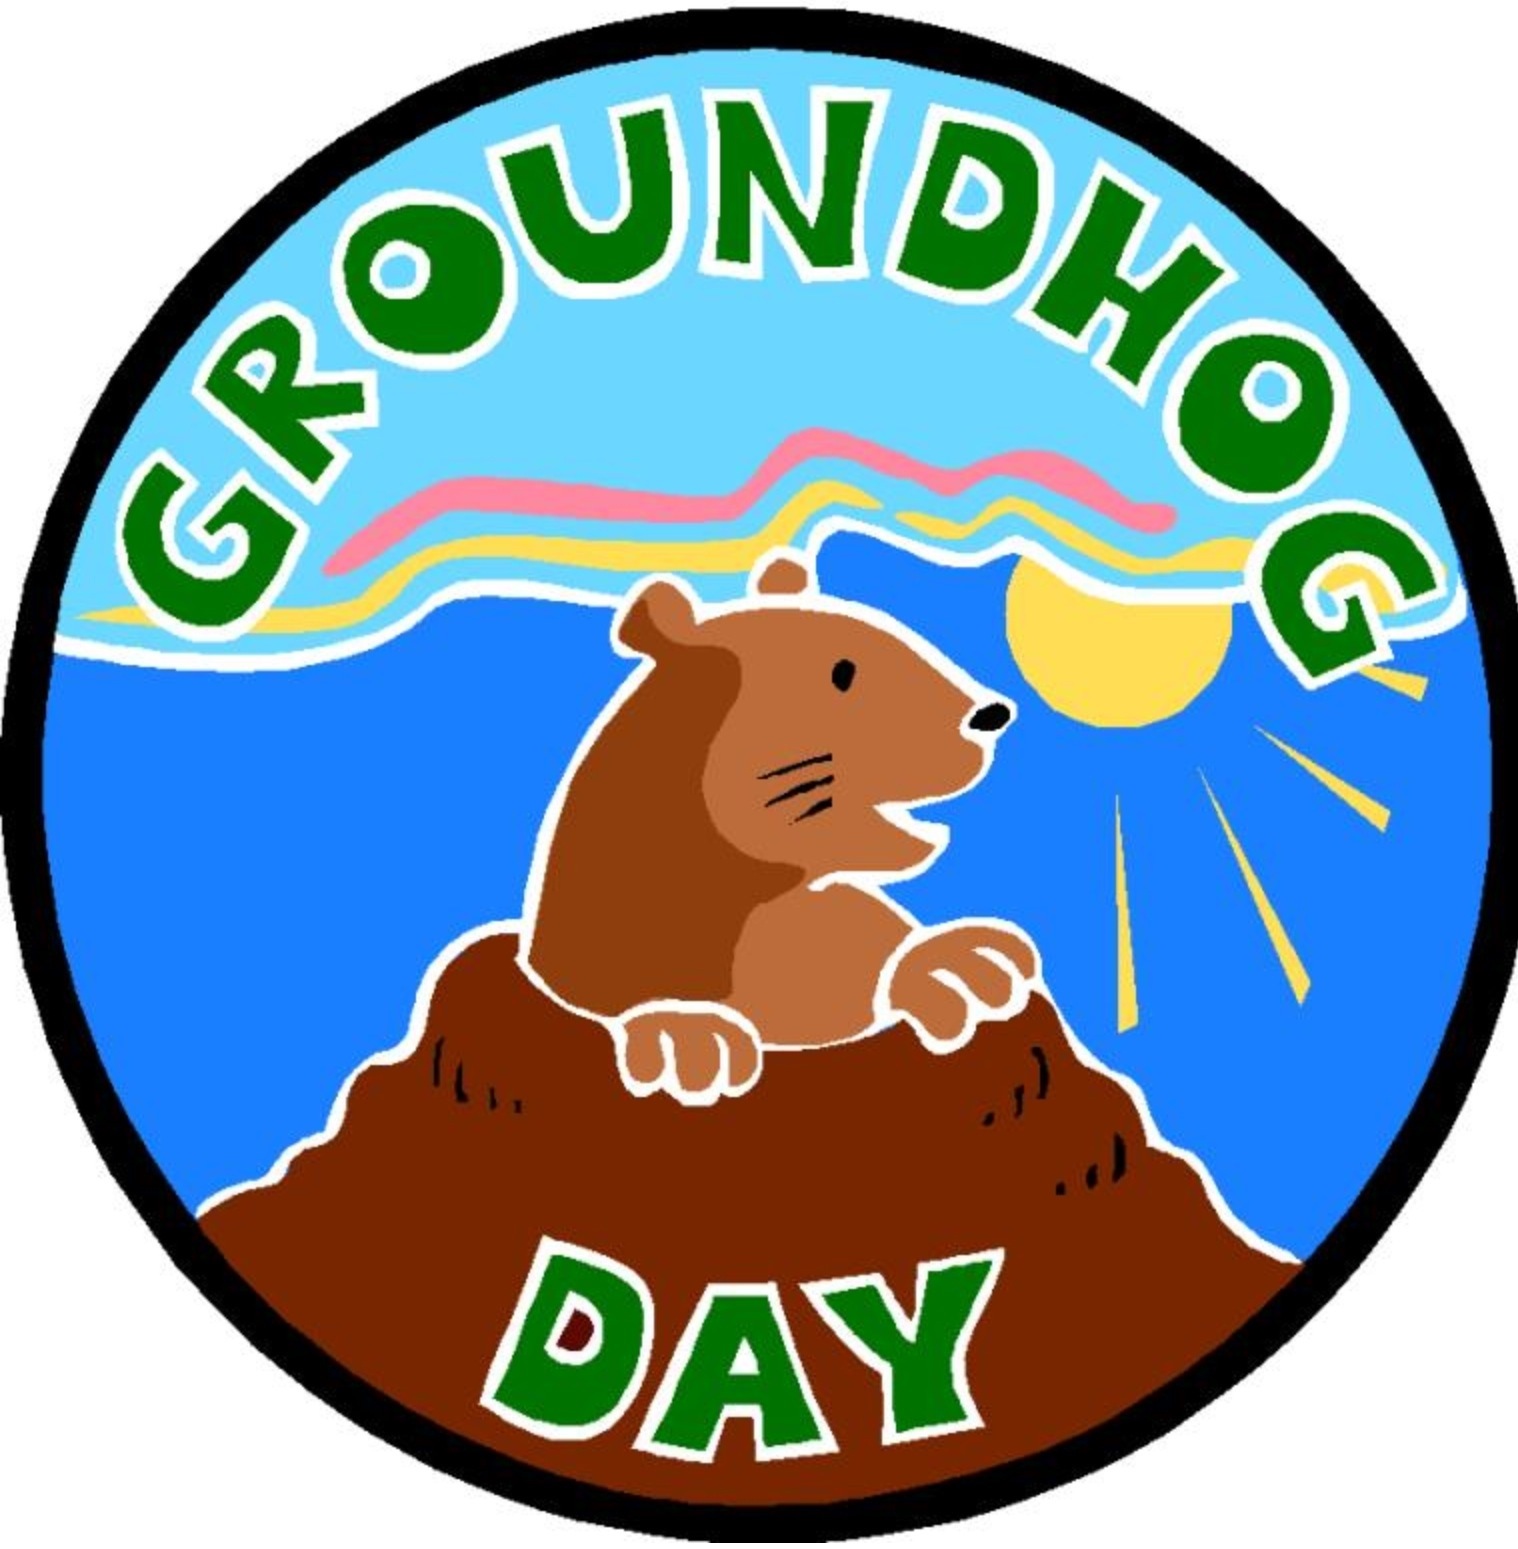 Groundhog Day Wishes To You